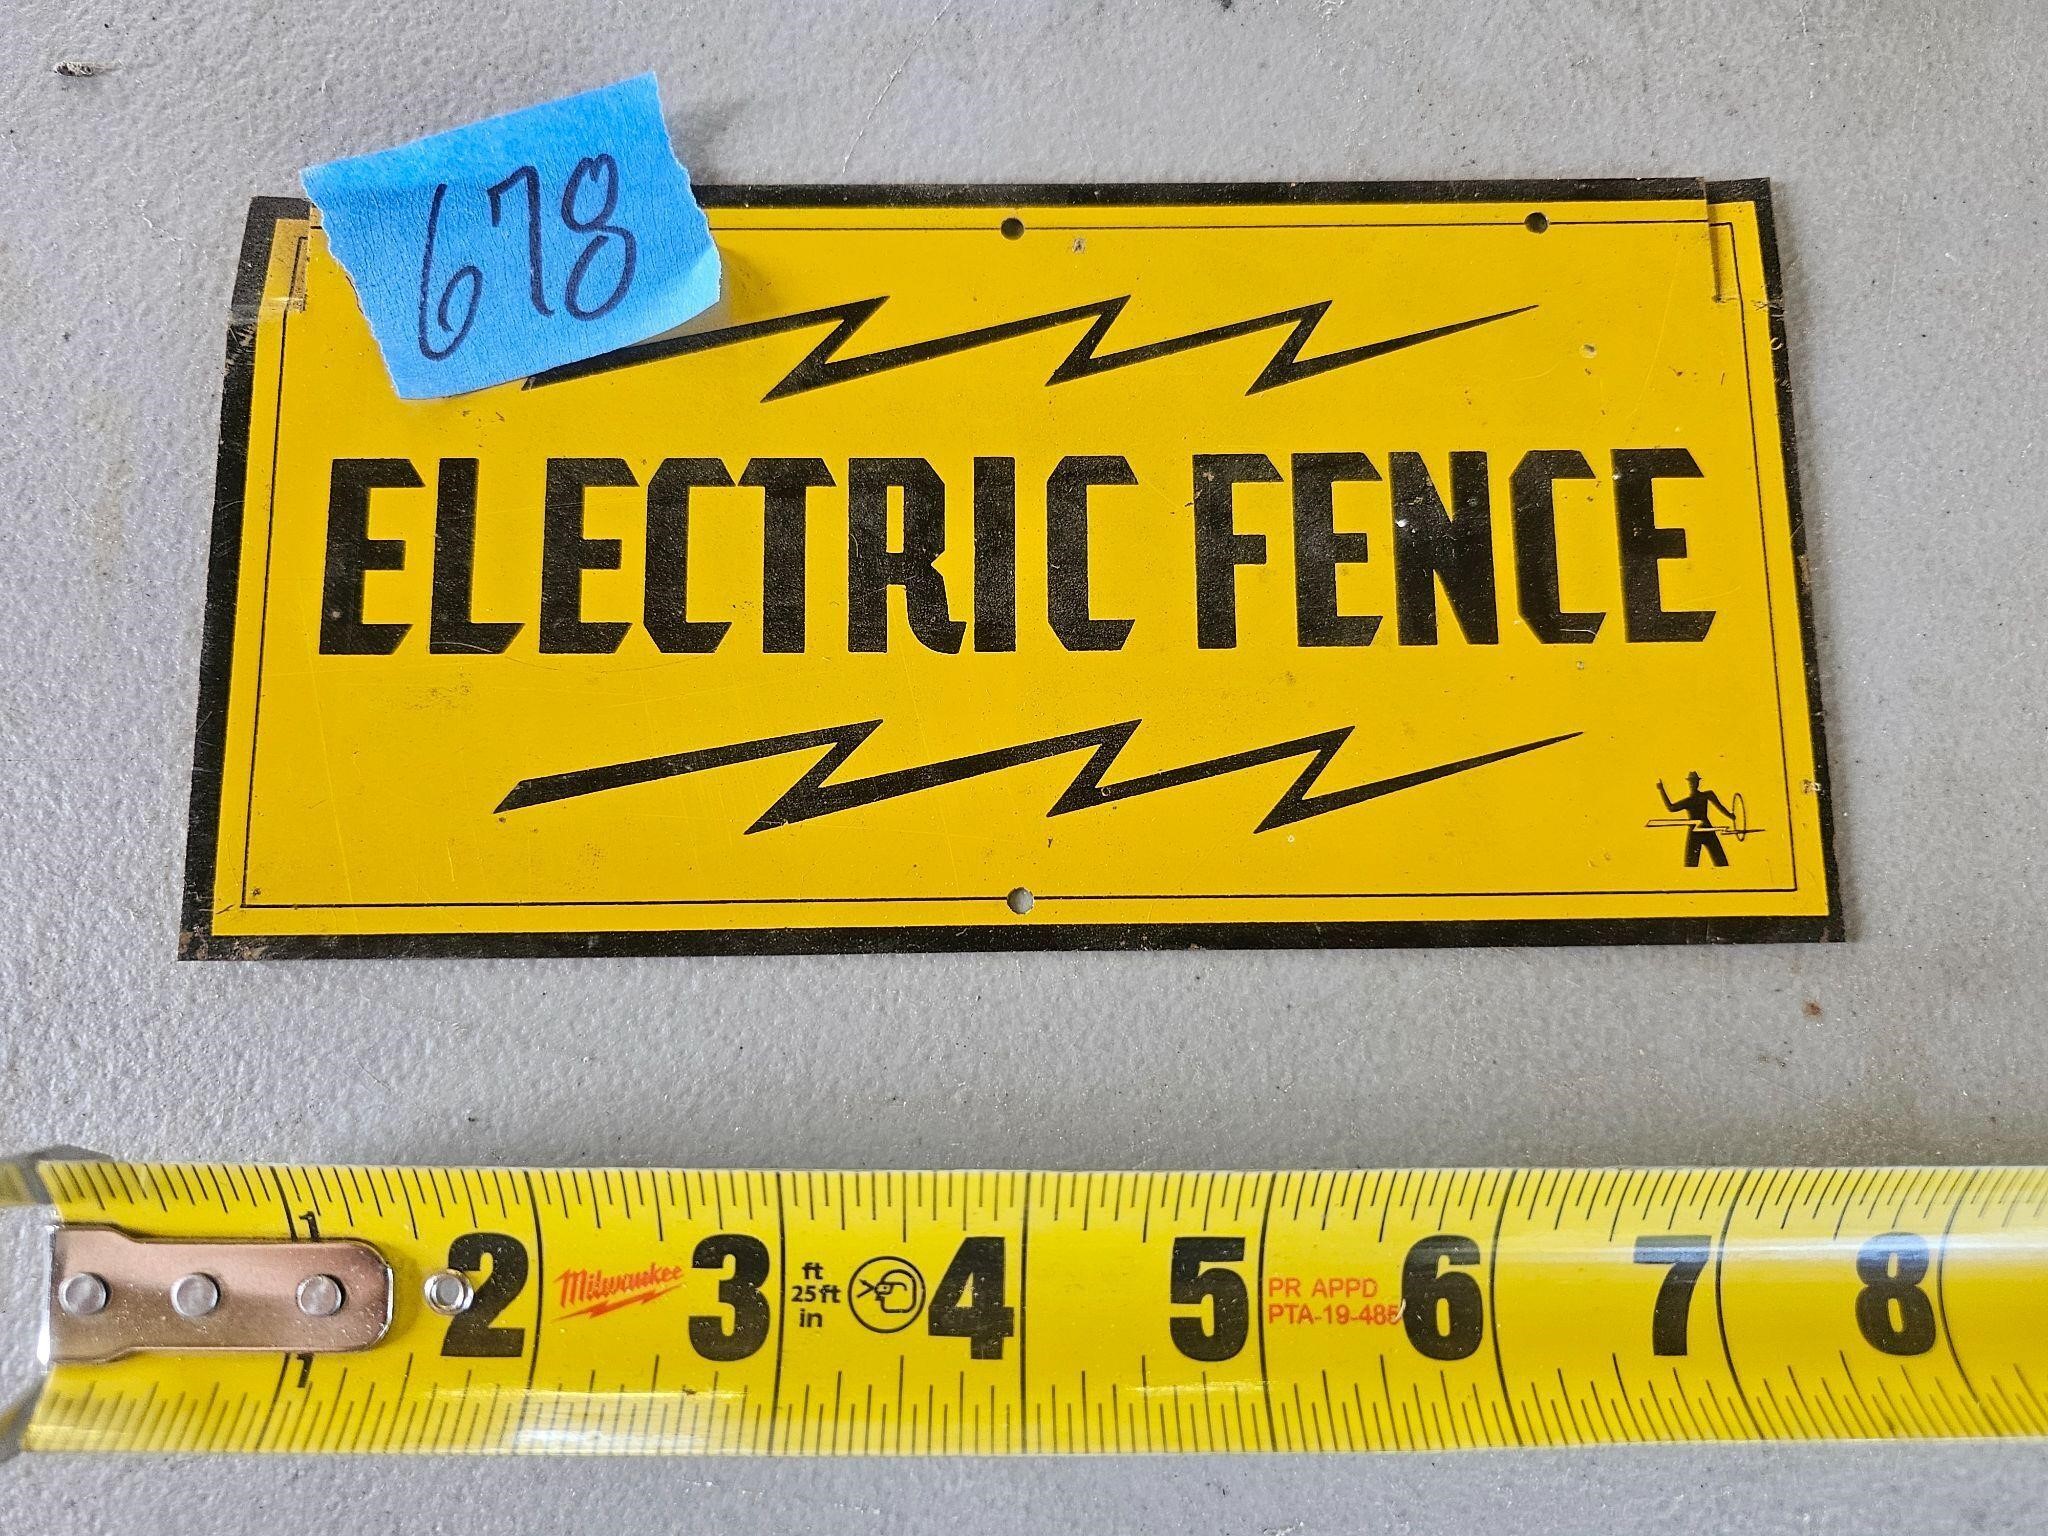 Electric Fence Sign